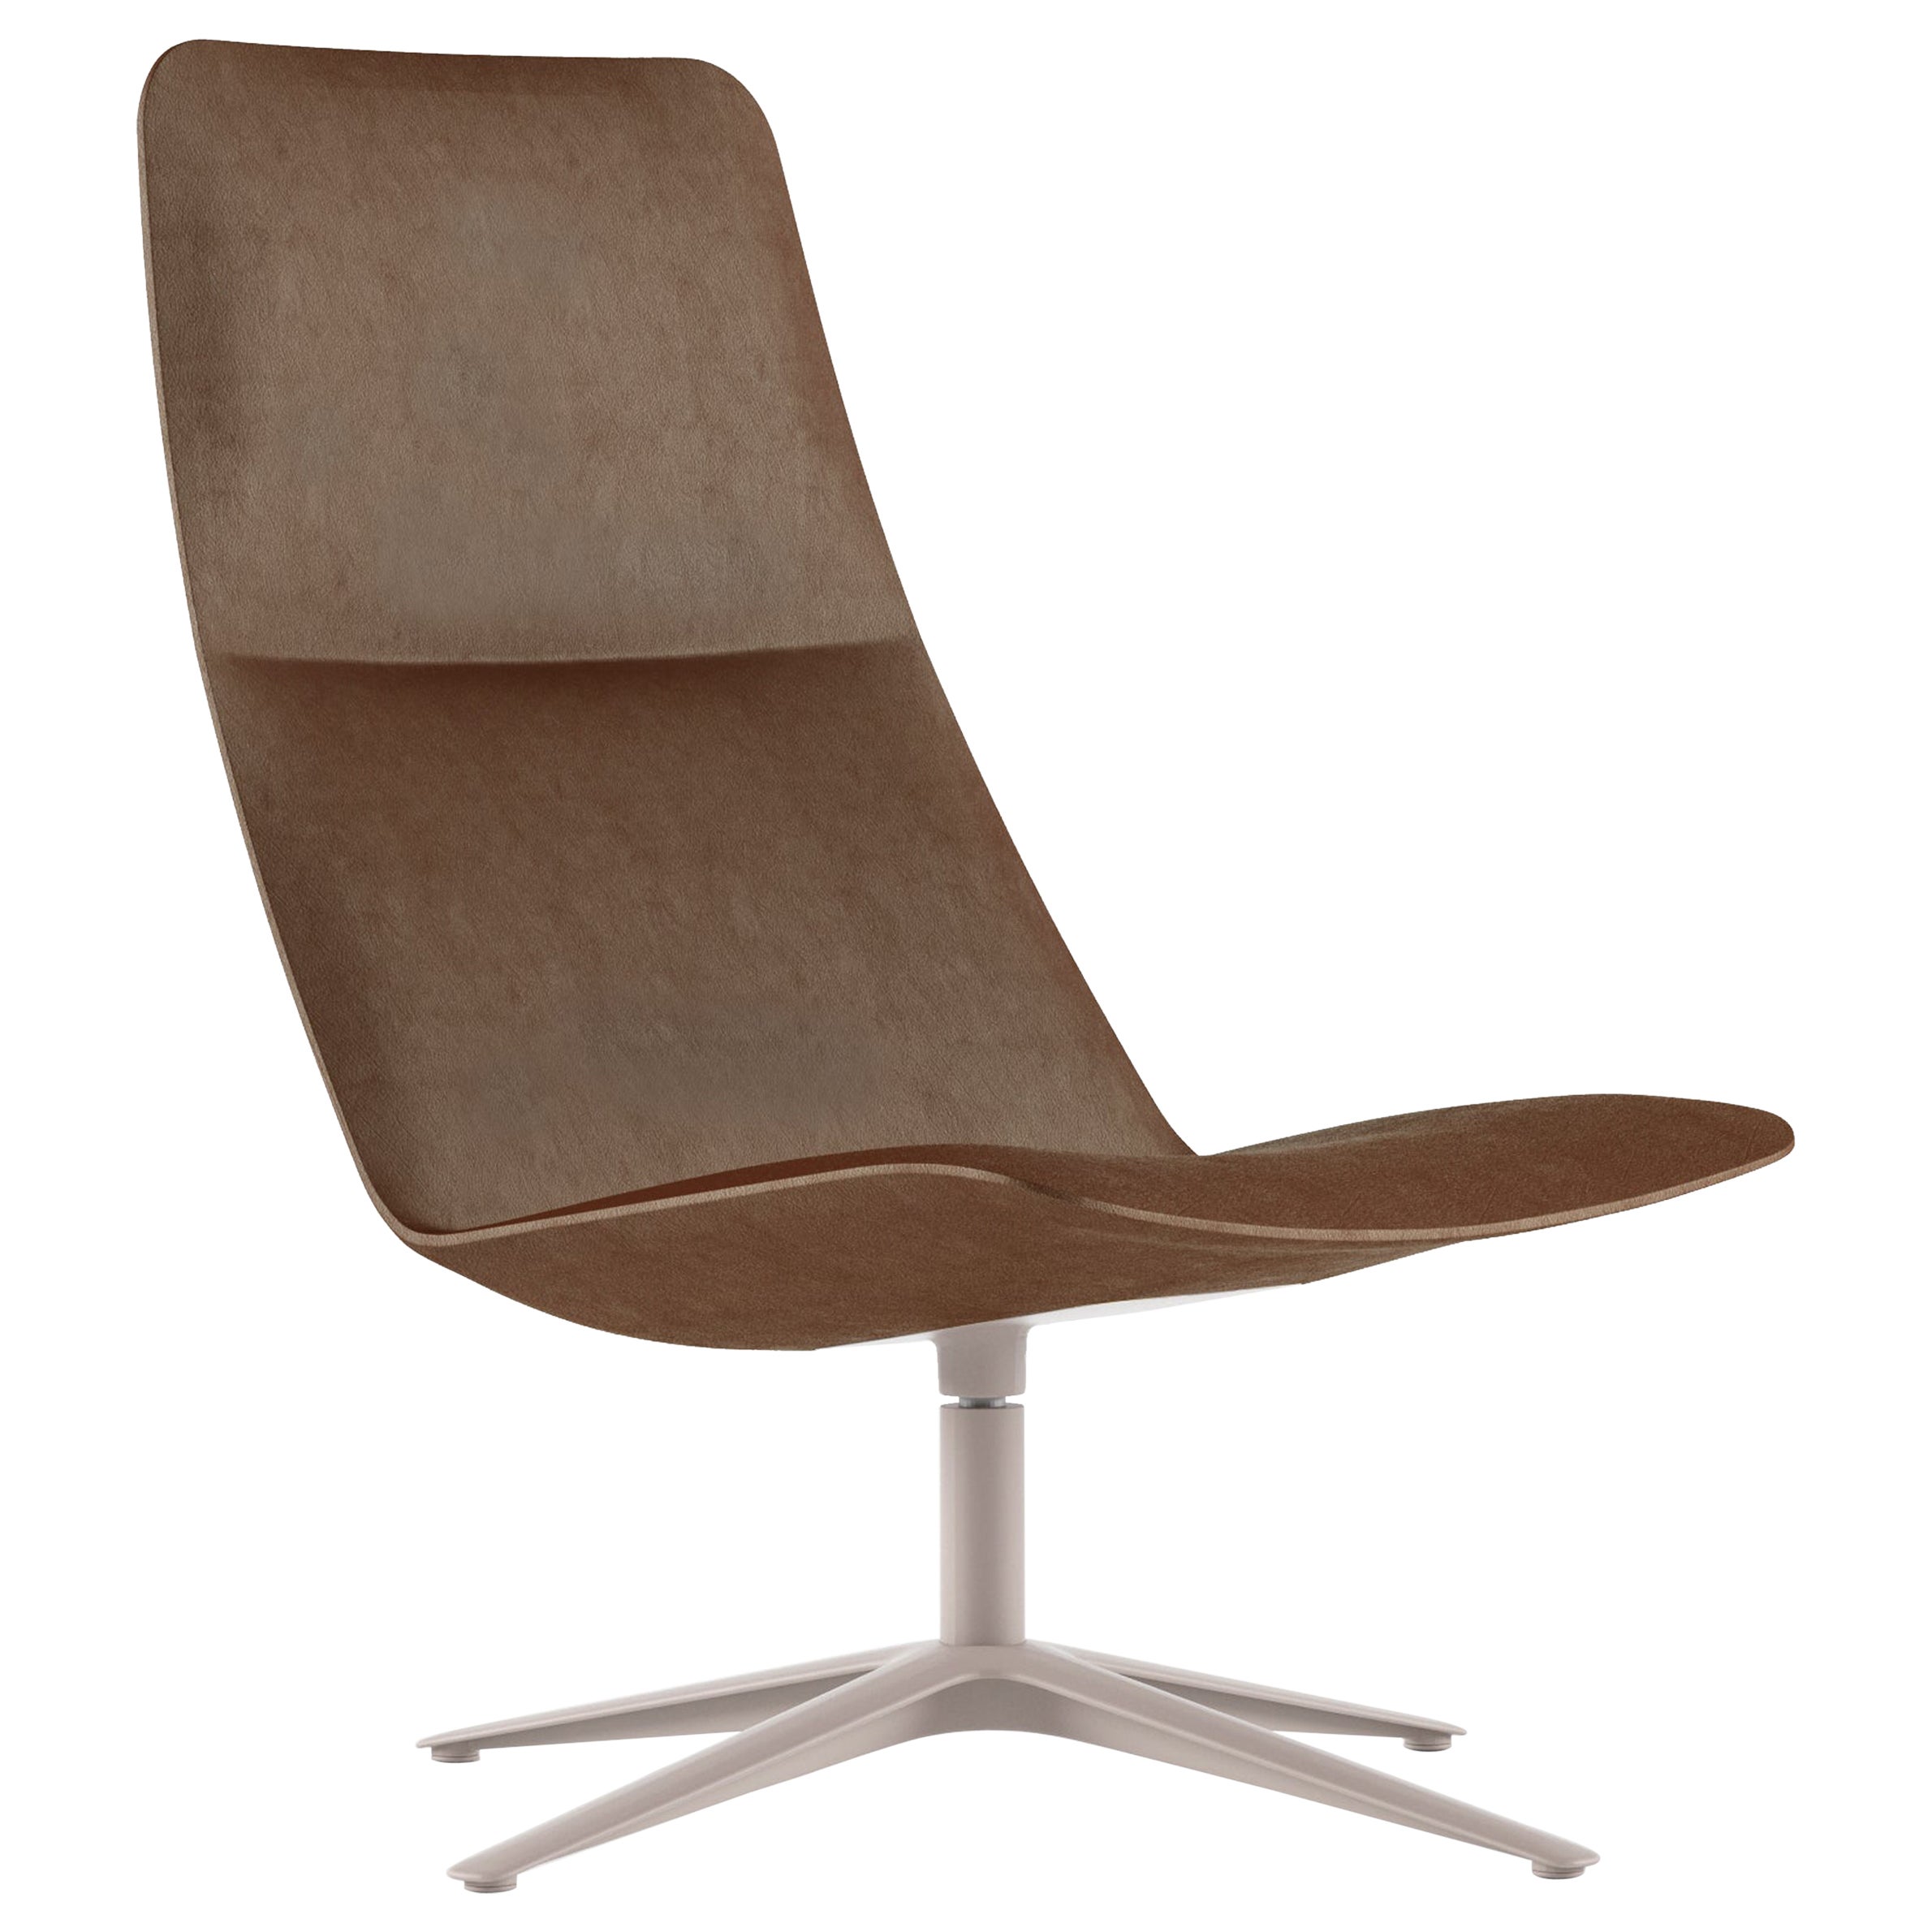 Alias 817 Slim Lounge High Chair in Brown Leather Seat with Sand Lacquered Frame For Sale